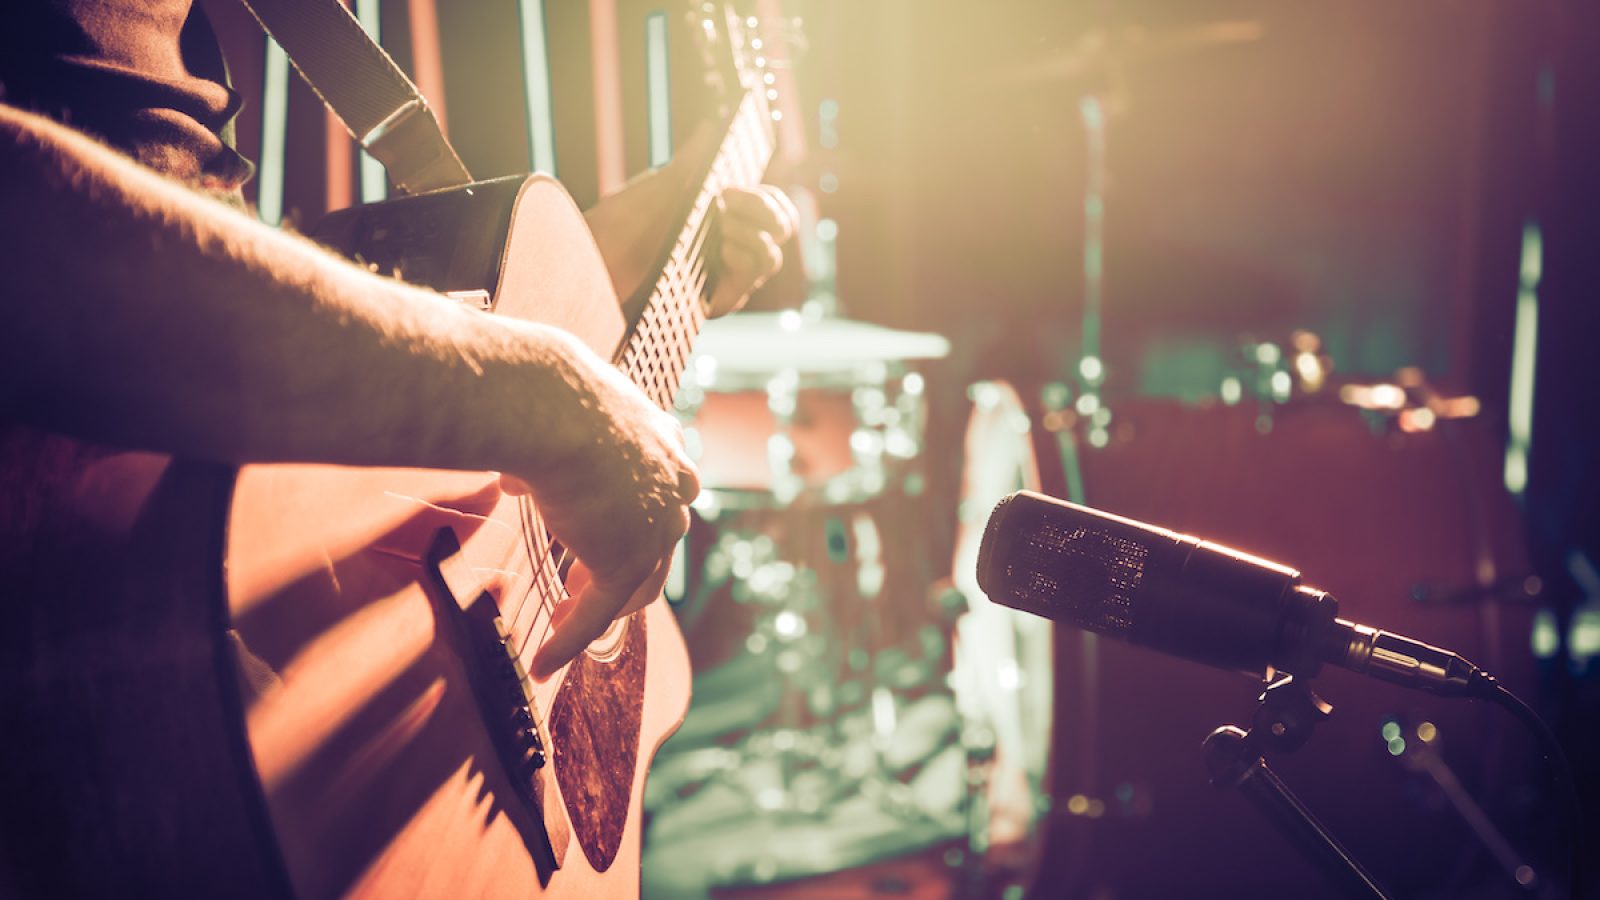 The Studio microphone records an acoustic guitar close-up, in a recording Studio or concert hall, with a drum set on a background in out-of-focus mode. Beautiful blurred background of colored lanterns